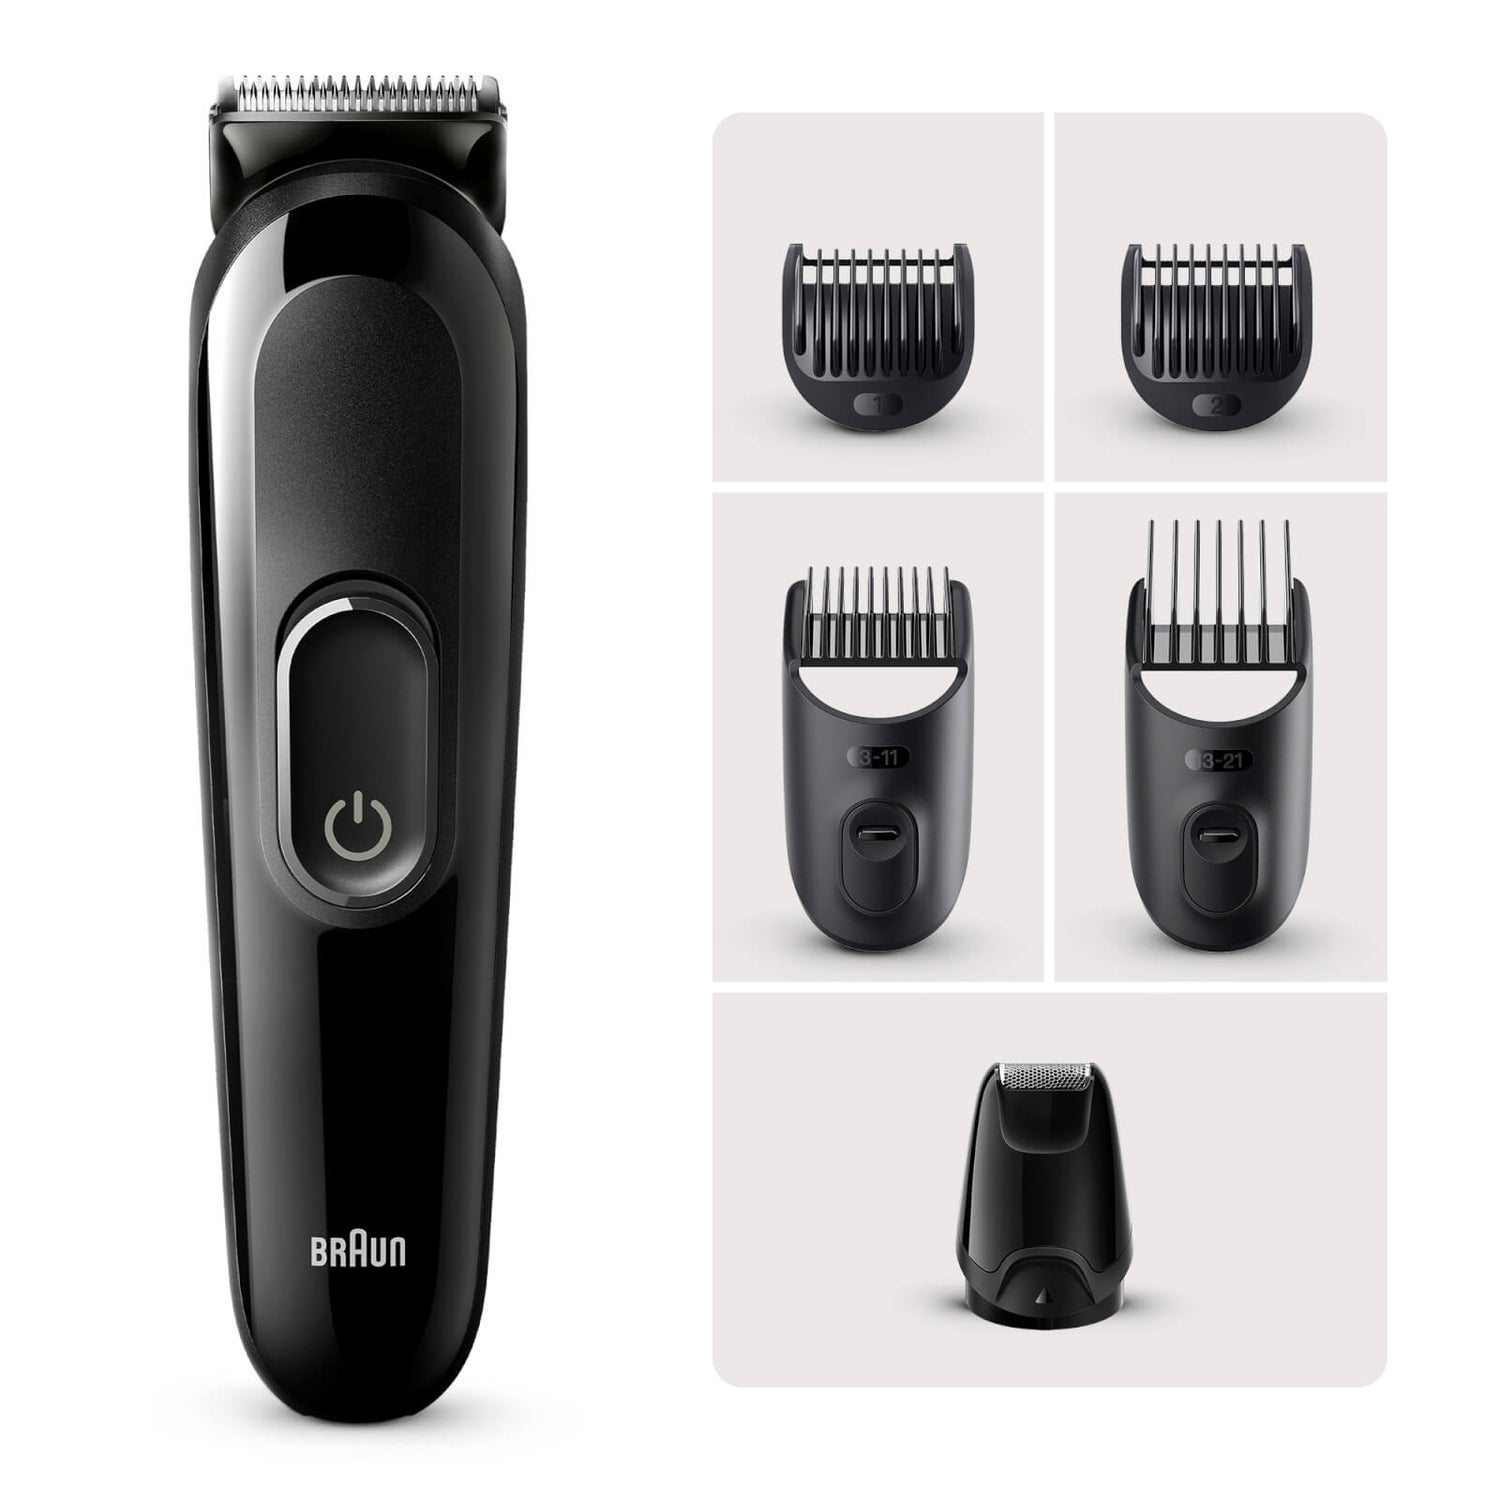 Braun All-In-One Style Kit Series 3 MGK3410, 6-in1 Kit For Beard & Hair